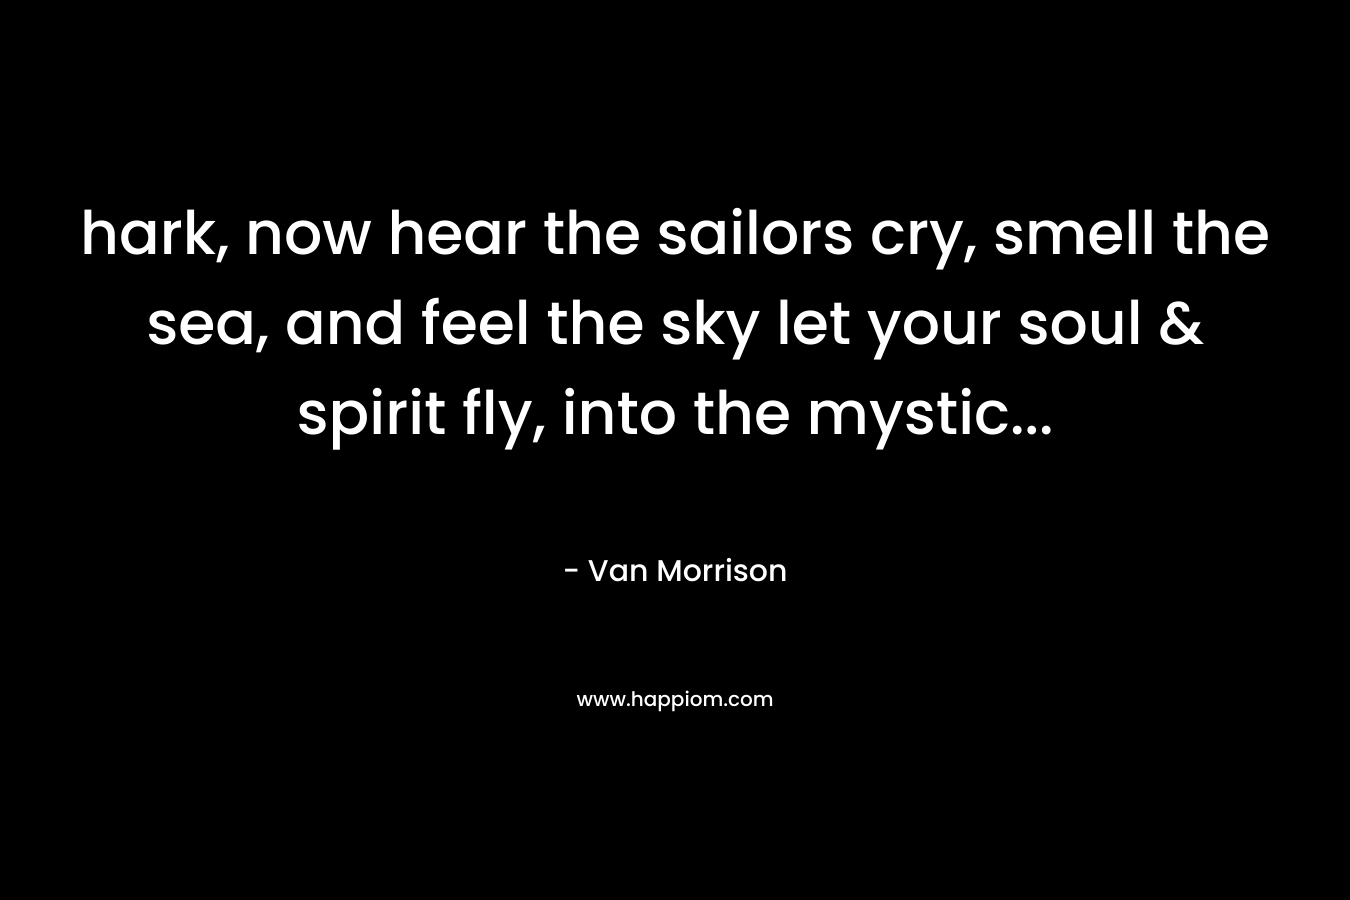 hark, now hear the sailors cry, smell the sea, and feel the sky let your soul & spirit fly, into the mystic… – Van Morrison